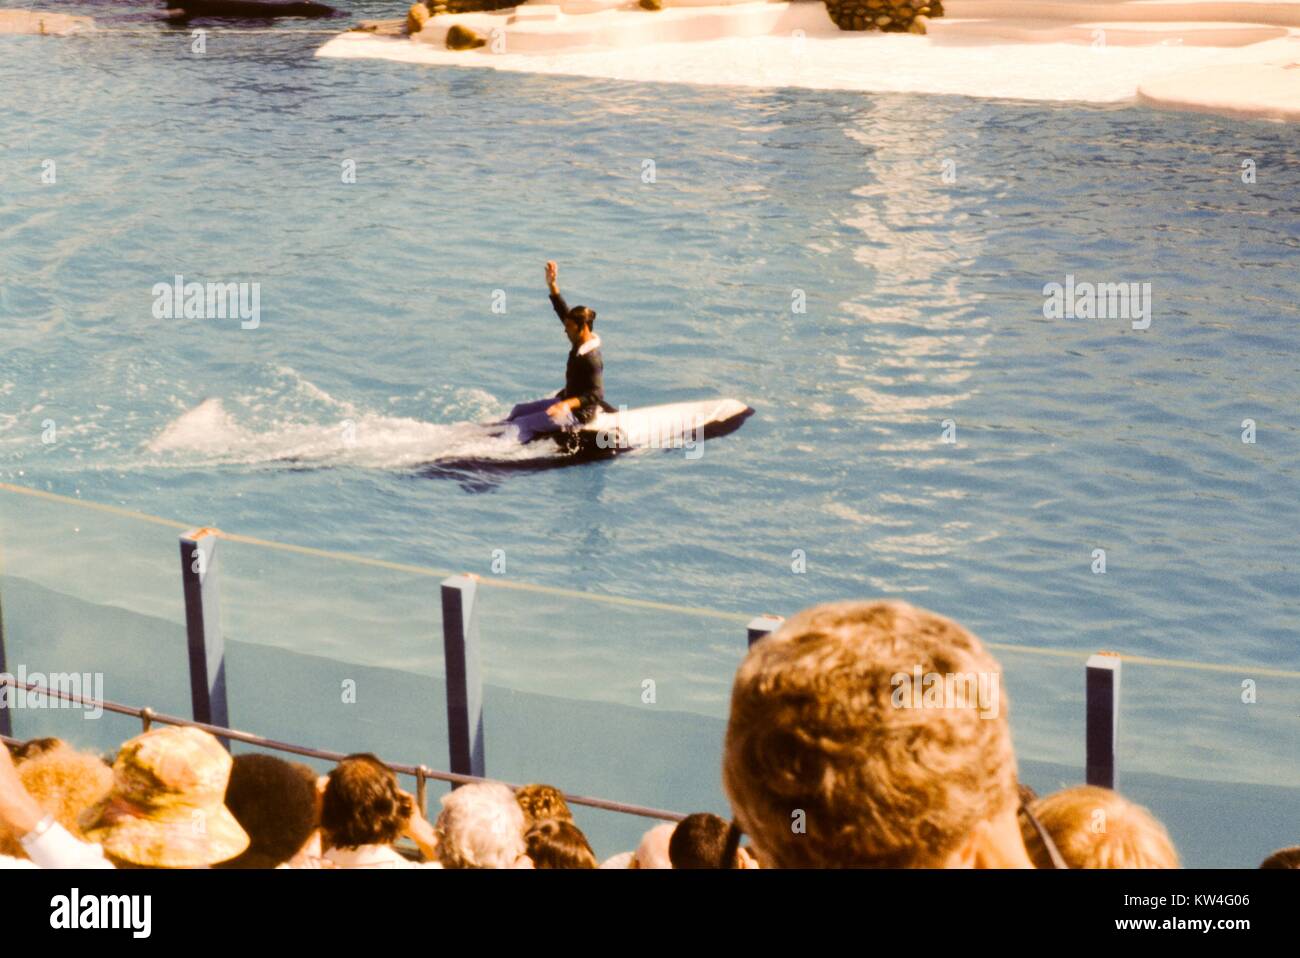 At Sea World in San Diego, California, a trainer rides on a belly of a killer whale and raises a hand into the air as the whale swims on its back through a tank of water, 1975. Stock Photo